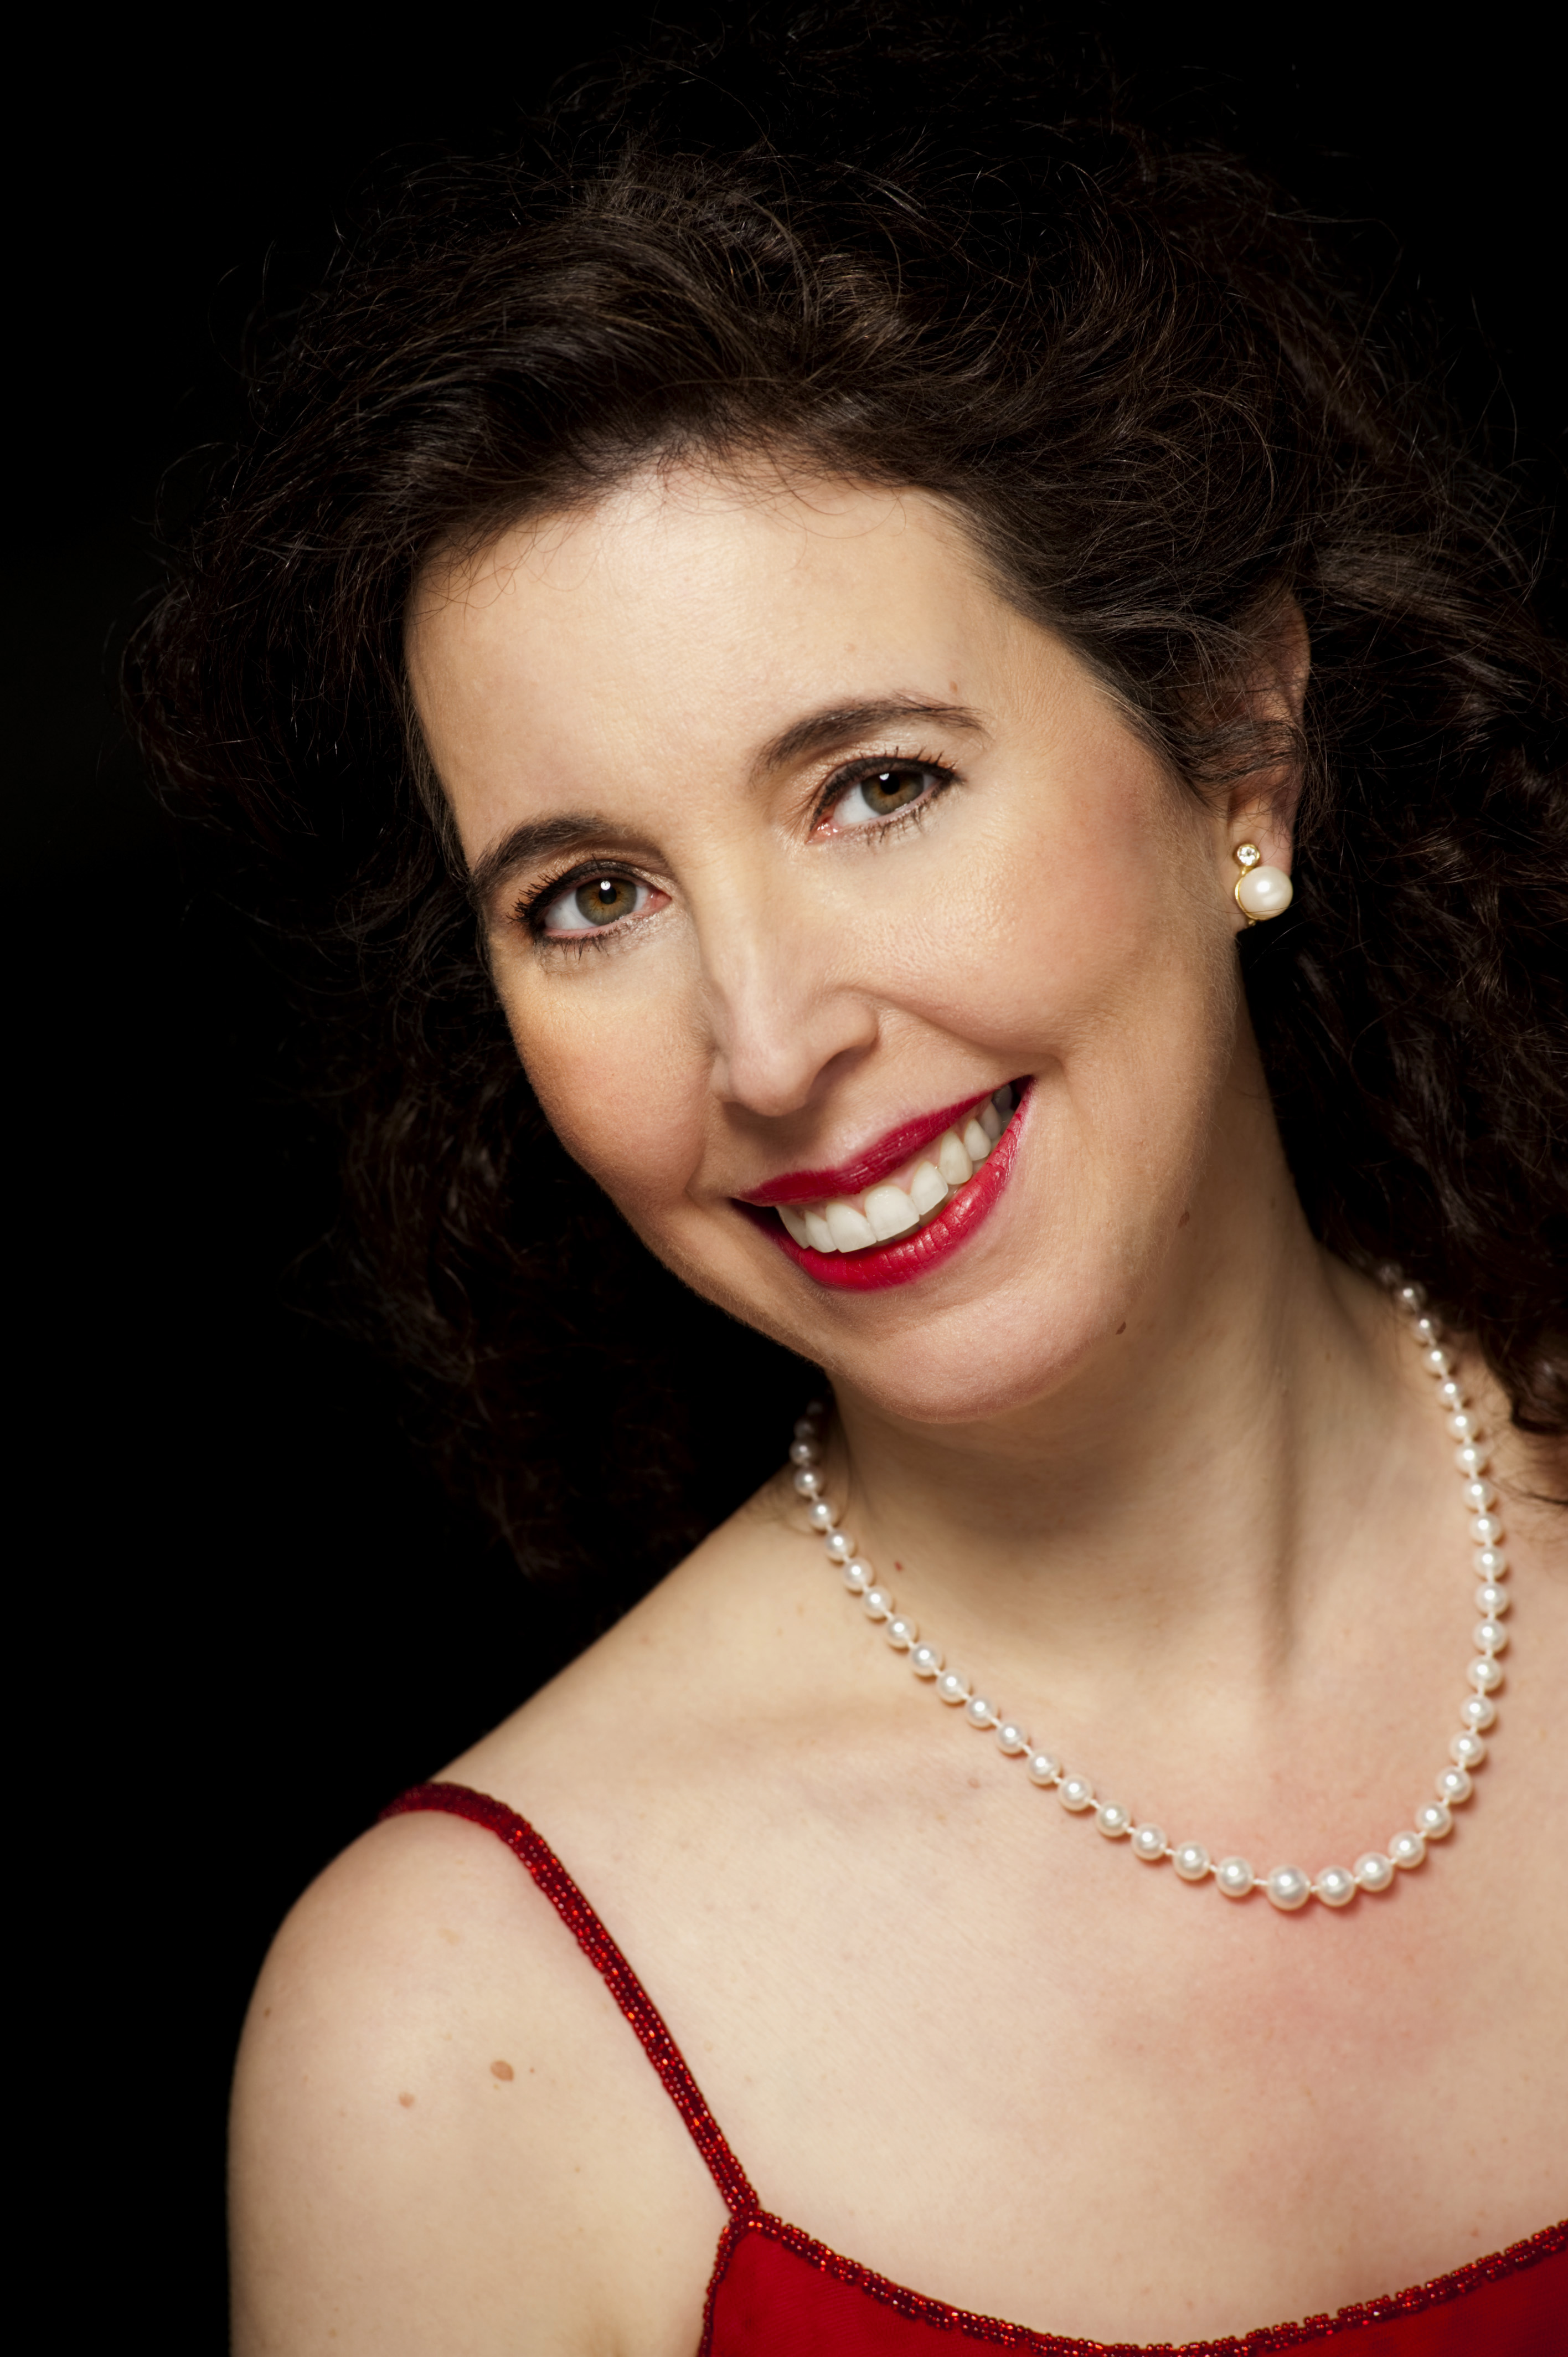 Classical pianist Angela Hewitt, celebrating the music of J.S. Bach